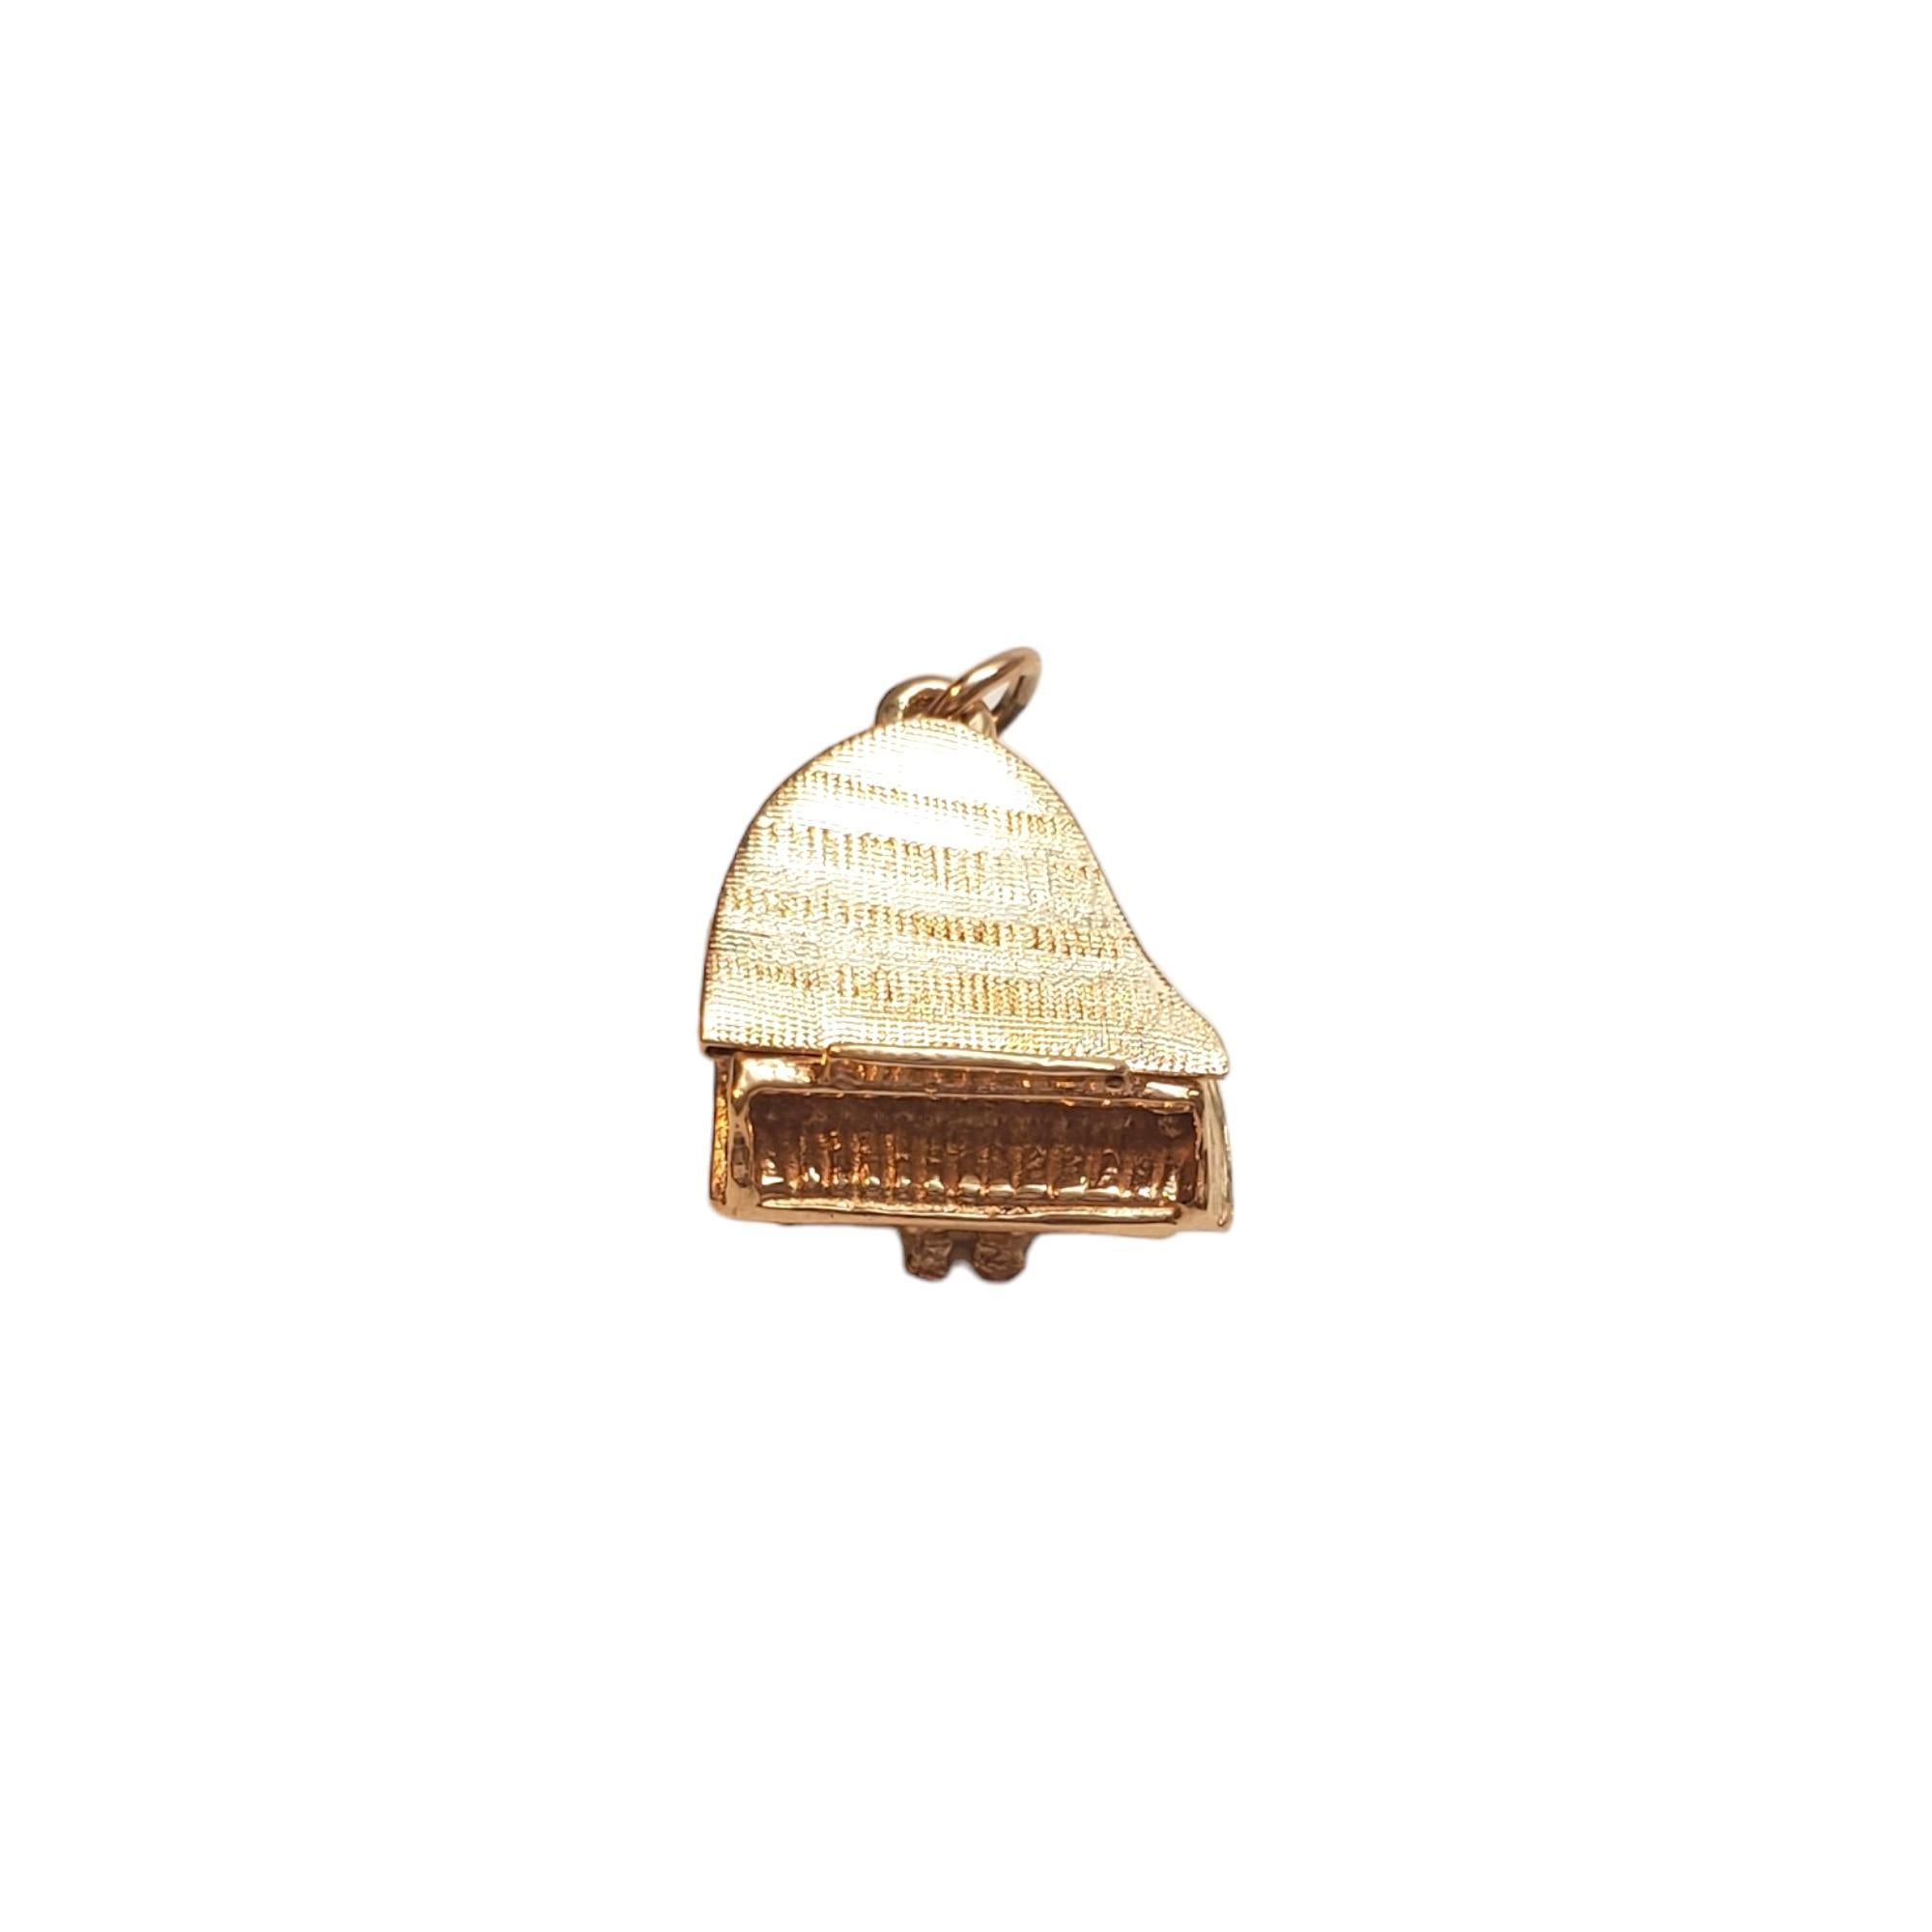 14K Yellow Gold Articulating Baby Grand Piano Charm

14K yellow gold piano charm with articulating lid and standing legs.

Hallmark: 14K 

Weight: 2.75 dwt/ 4.28 g

Length w/ bail: 19.75 mm

Size: 16.3 mm X 15.46 mm X 12.08 mm

Very good condition,